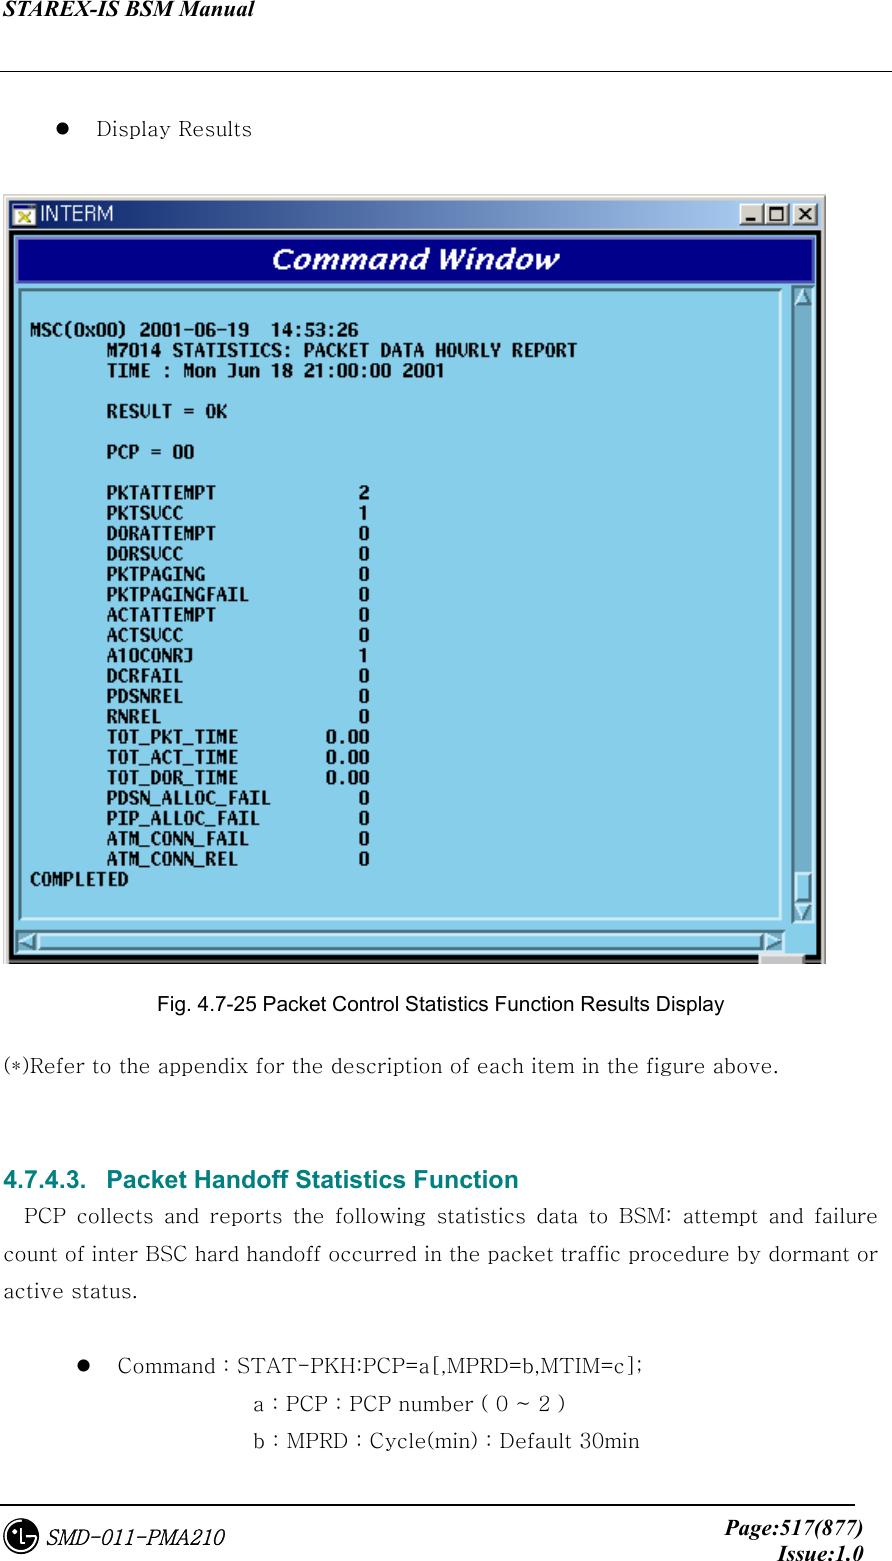 STAREX-IS BSM Manual     Page:517(877)Issue:1.0SMD-011-PMA210    Display Results   Fig. 4.7-25 Packet Control Statistics Function Results Display (*)Refer to the appendix for the description of each item in the figure above.   4.7.4.3.   Packet Handoff Statistics Function PCP  collects  and  reports  the  following  statistics  data  to  BSM:  attempt  and  failure count of inter BSC hard handoff occurred in the packet traffic procedure by dormant or active status.    Command : STAT-PKH:PCP=a[,MPRD=b,MTIM=c];       a : PCP : PCP number ( 0 ~ 2 )       b : MPRD : Cycle(min) : Default 30min 